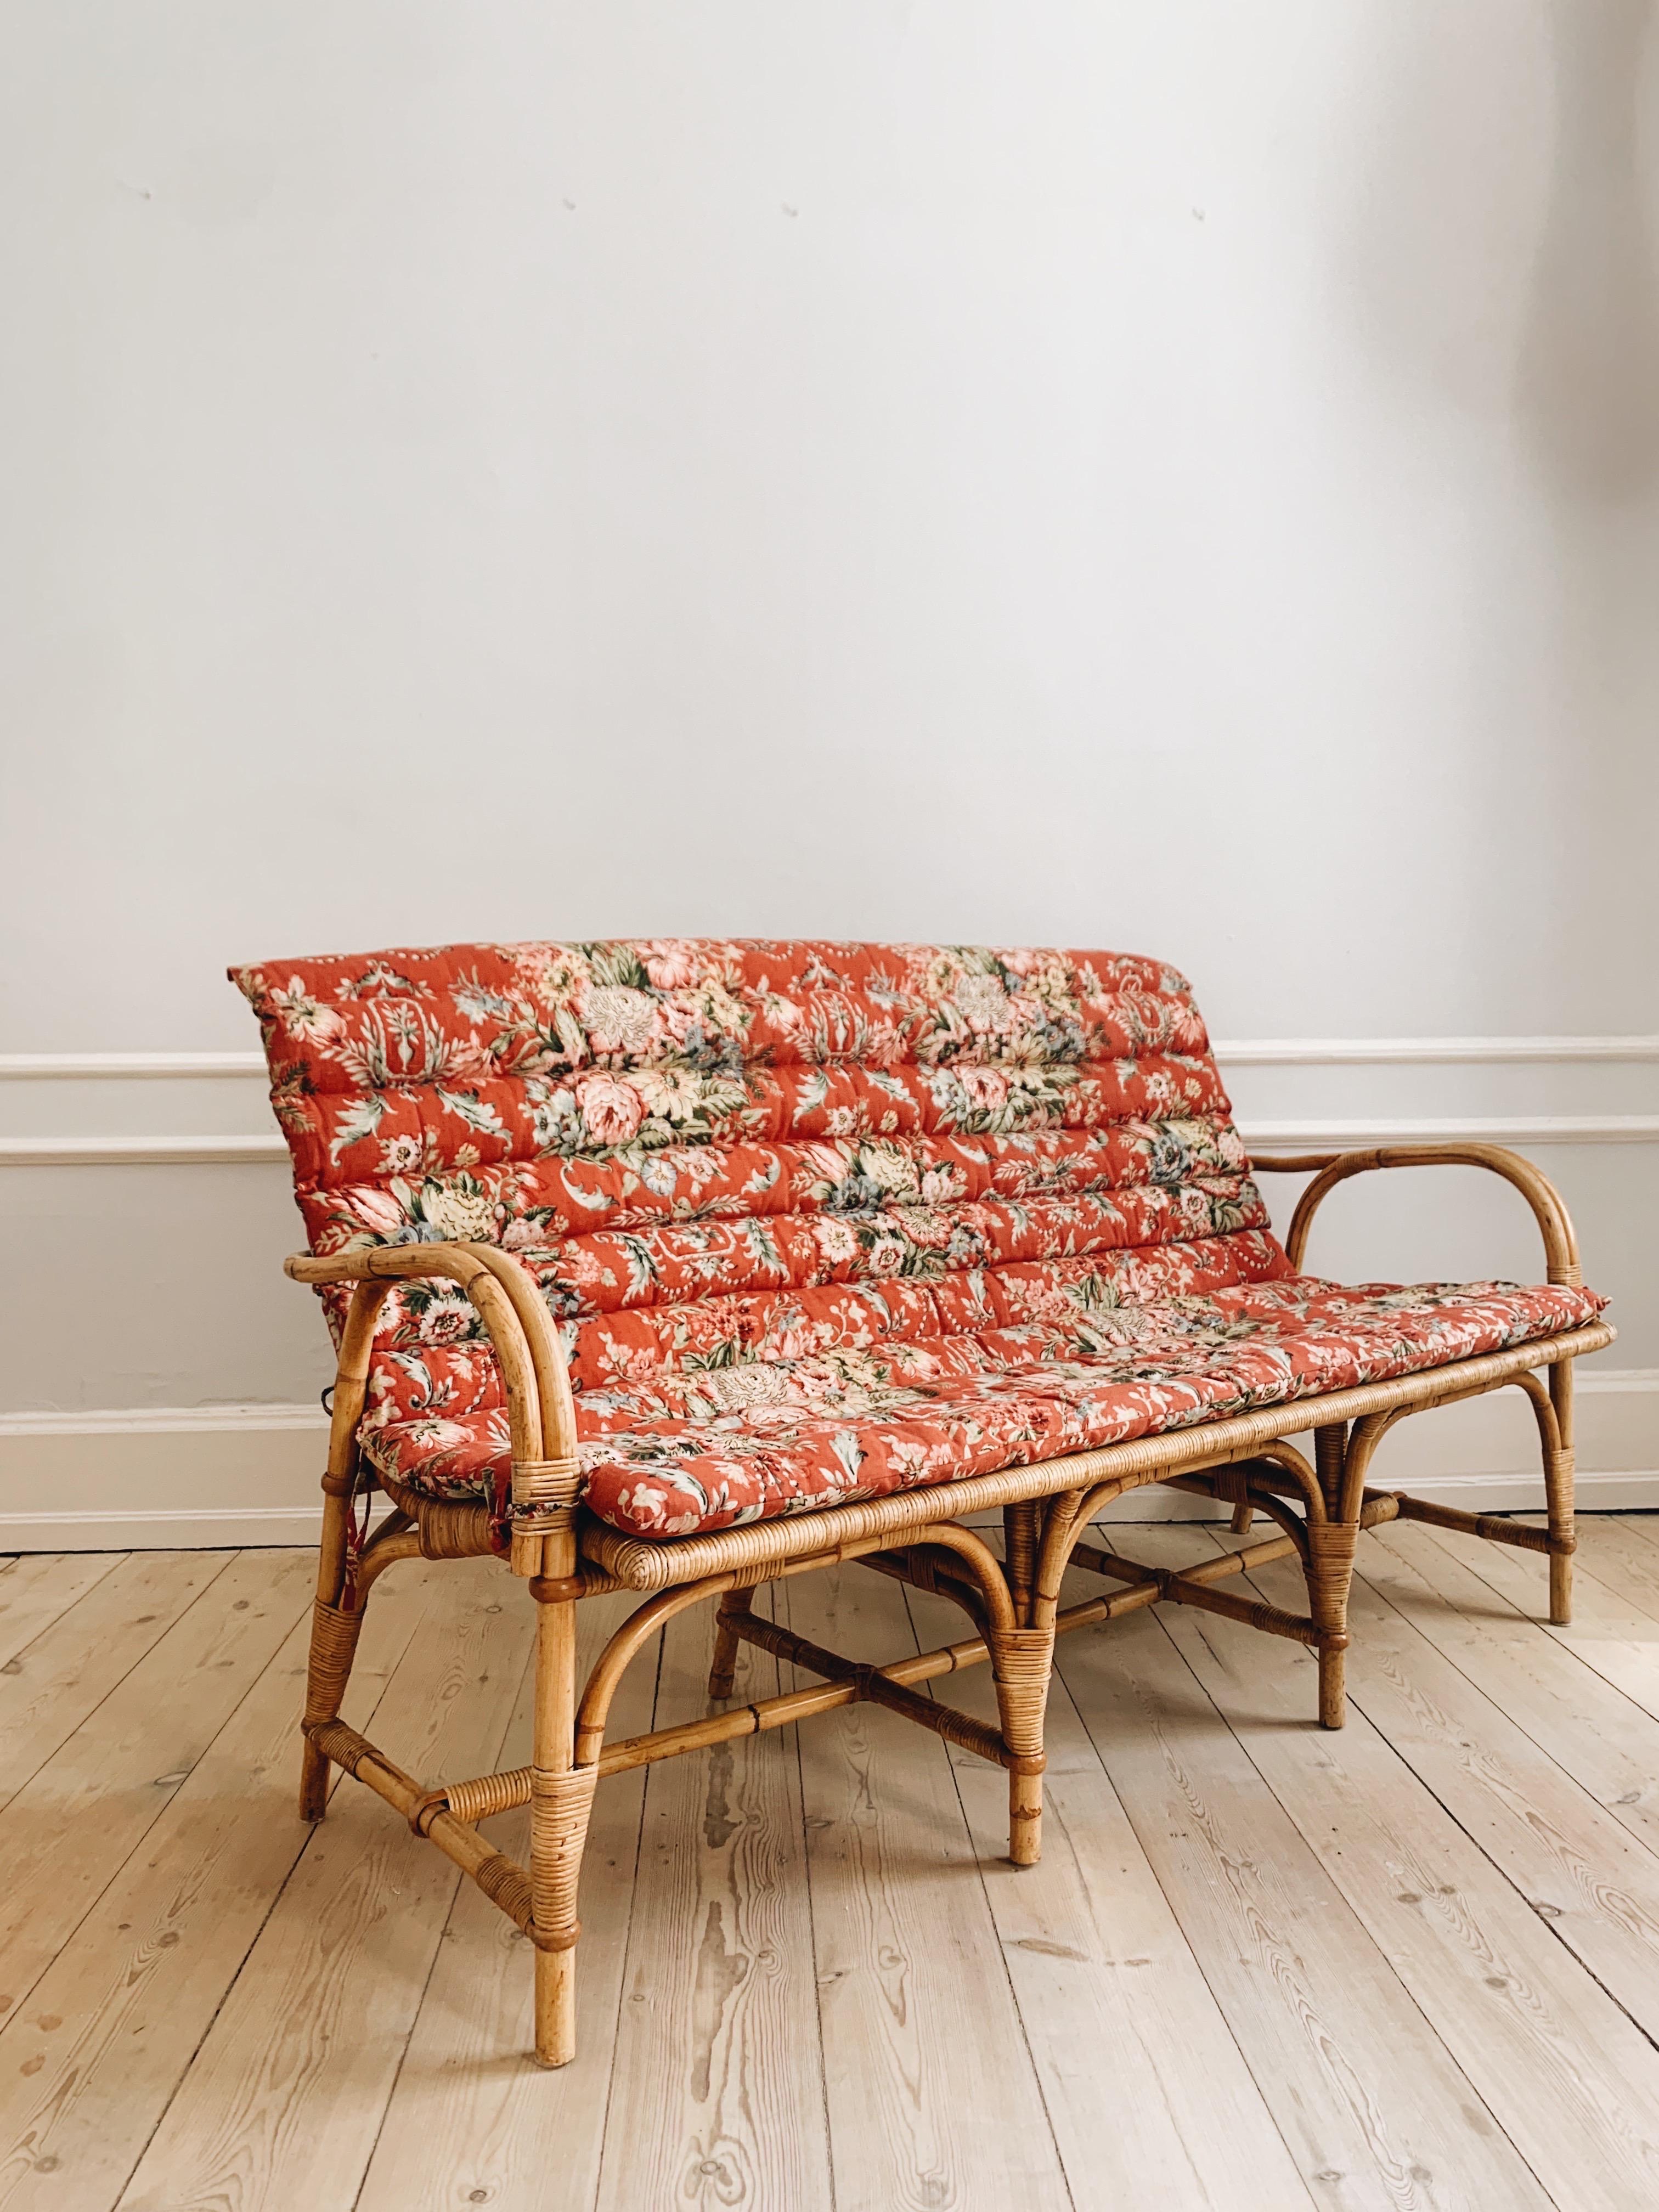 Mid-20th Century Danish wicker bench from the 1940’s - attributed Robert Wengler.   For Sale